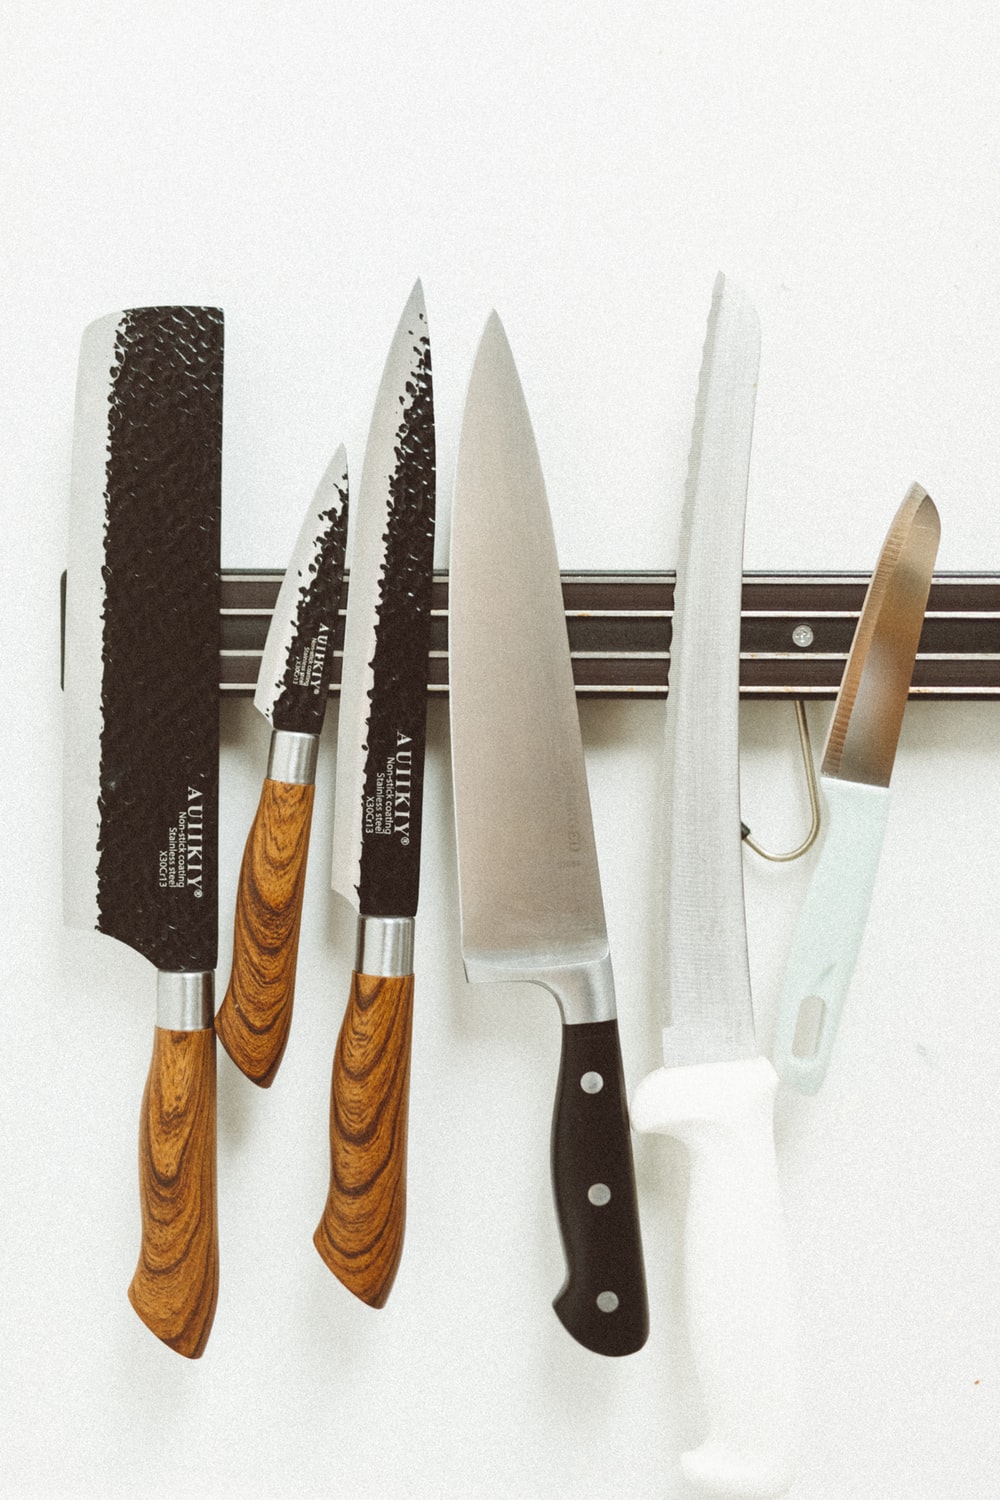 Chefs Knife Picture. Download Free Image